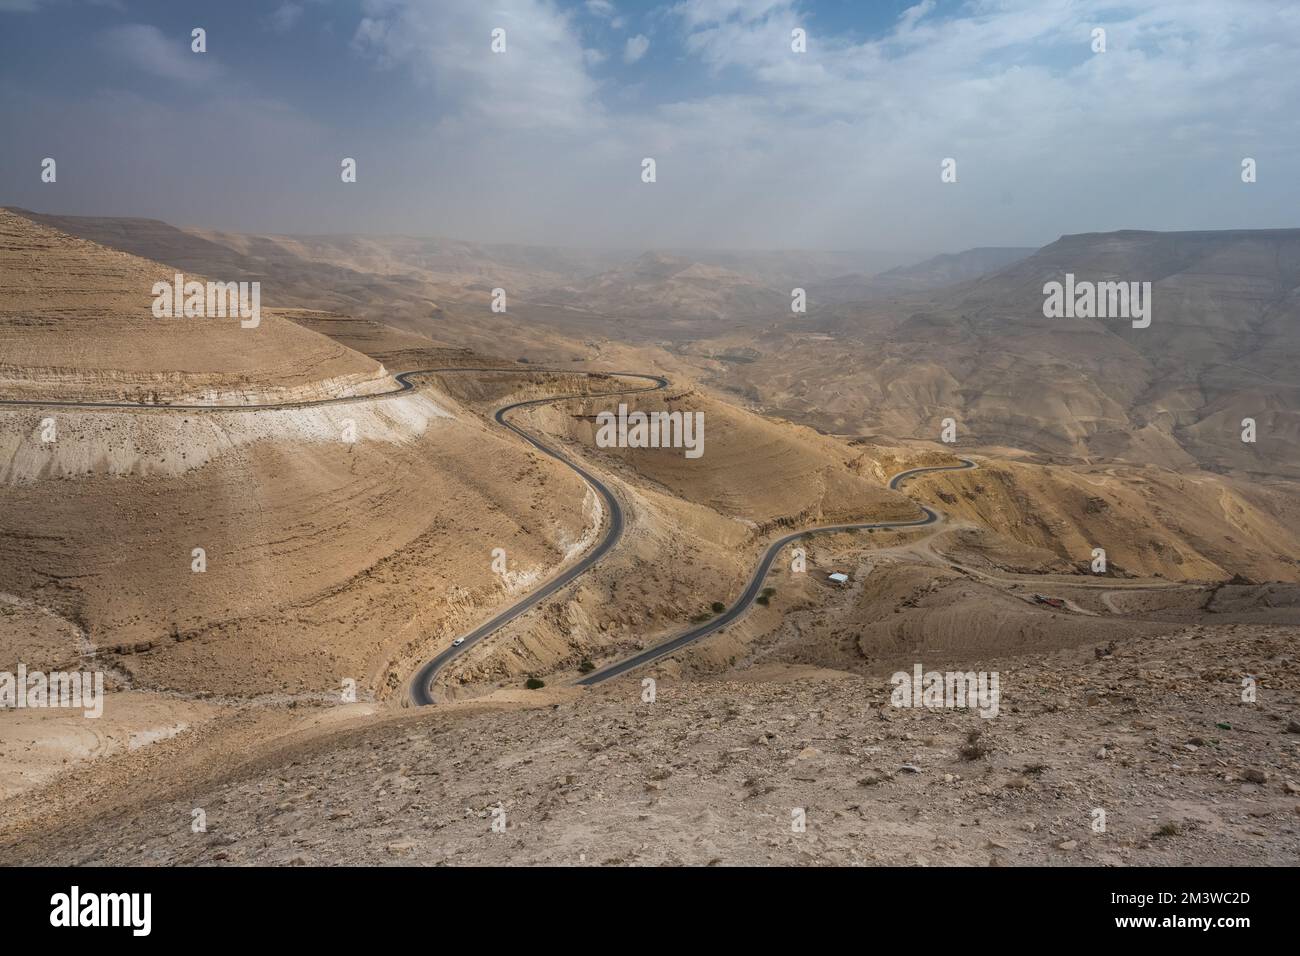 King's Highway 35 Wadi Mujib Valley, Mountain and Hill Landscape in Jordan with Cloudy Sky Stock Photo